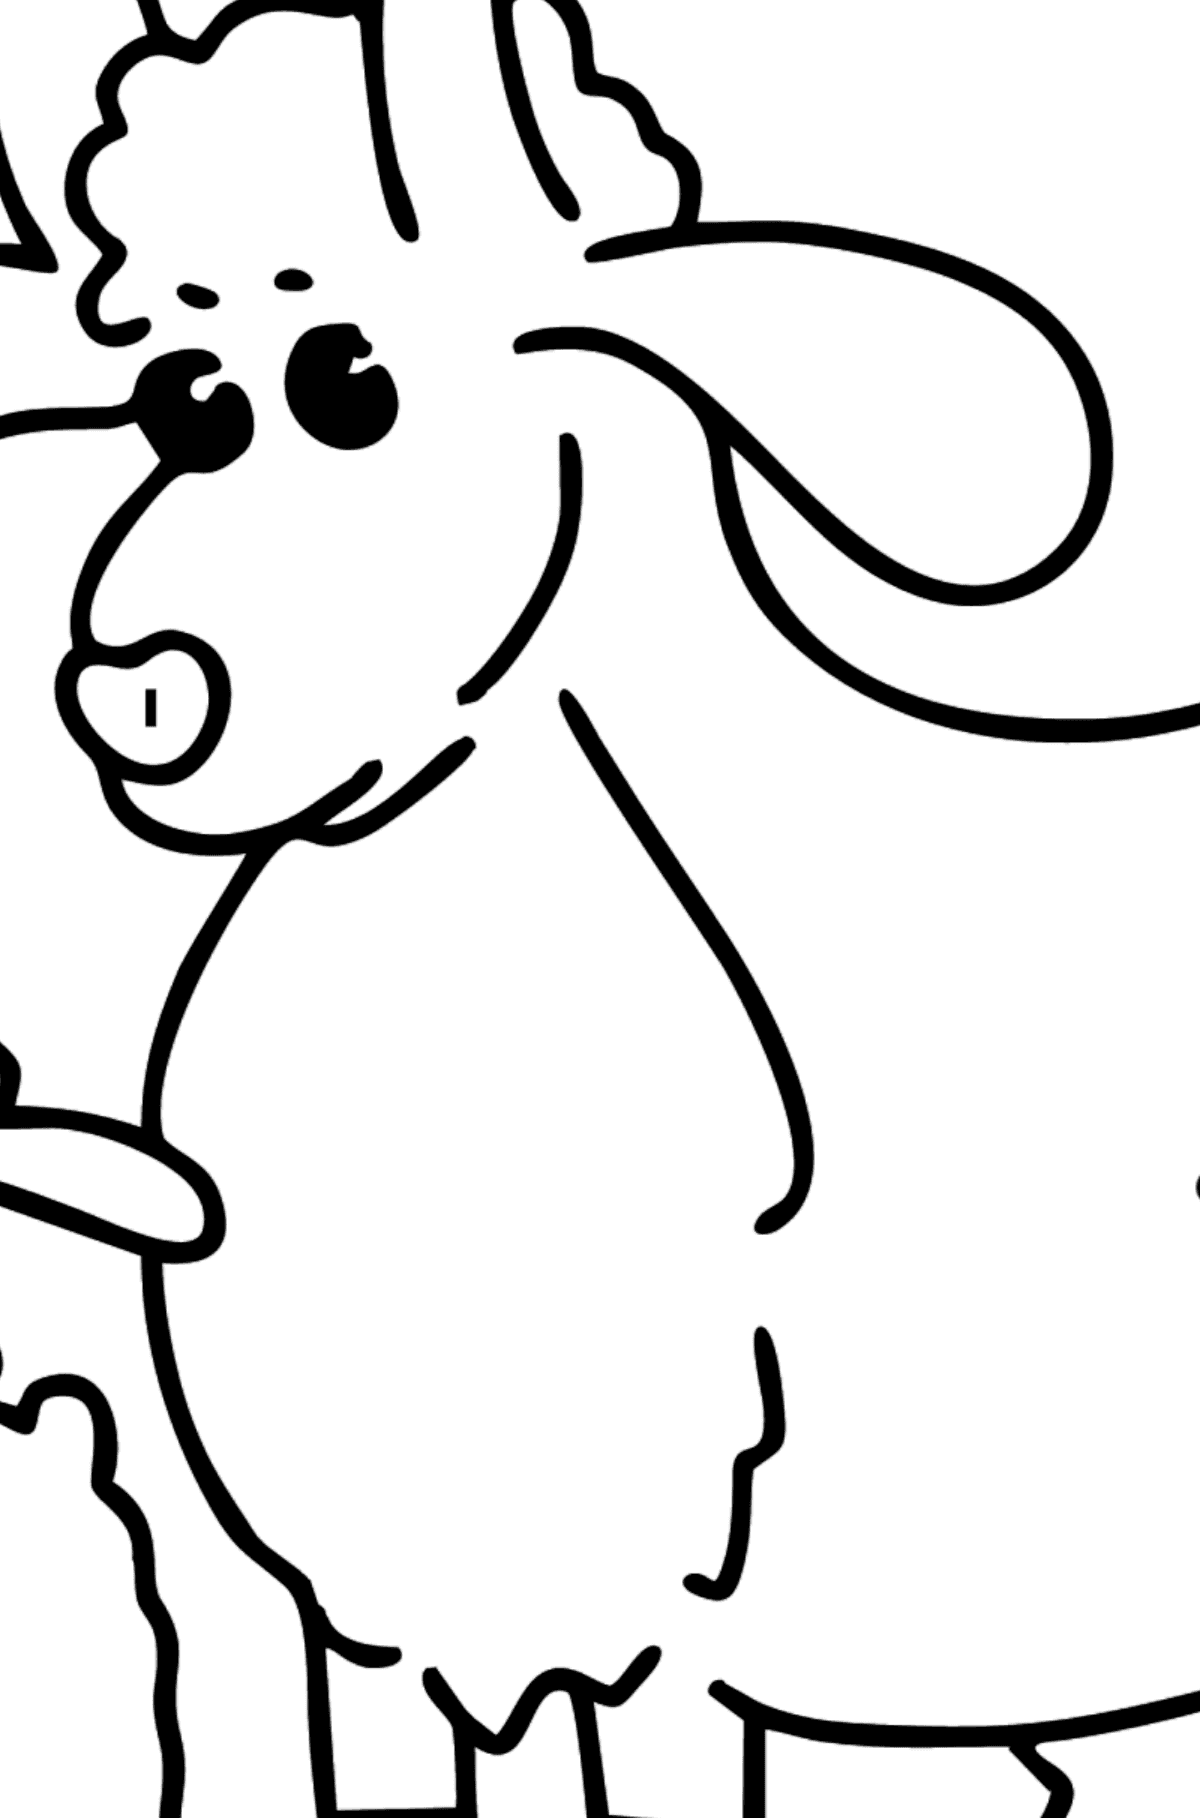 Goat and Kid coloring page - Coloring by Symbols and Geometric Shapes for Kids